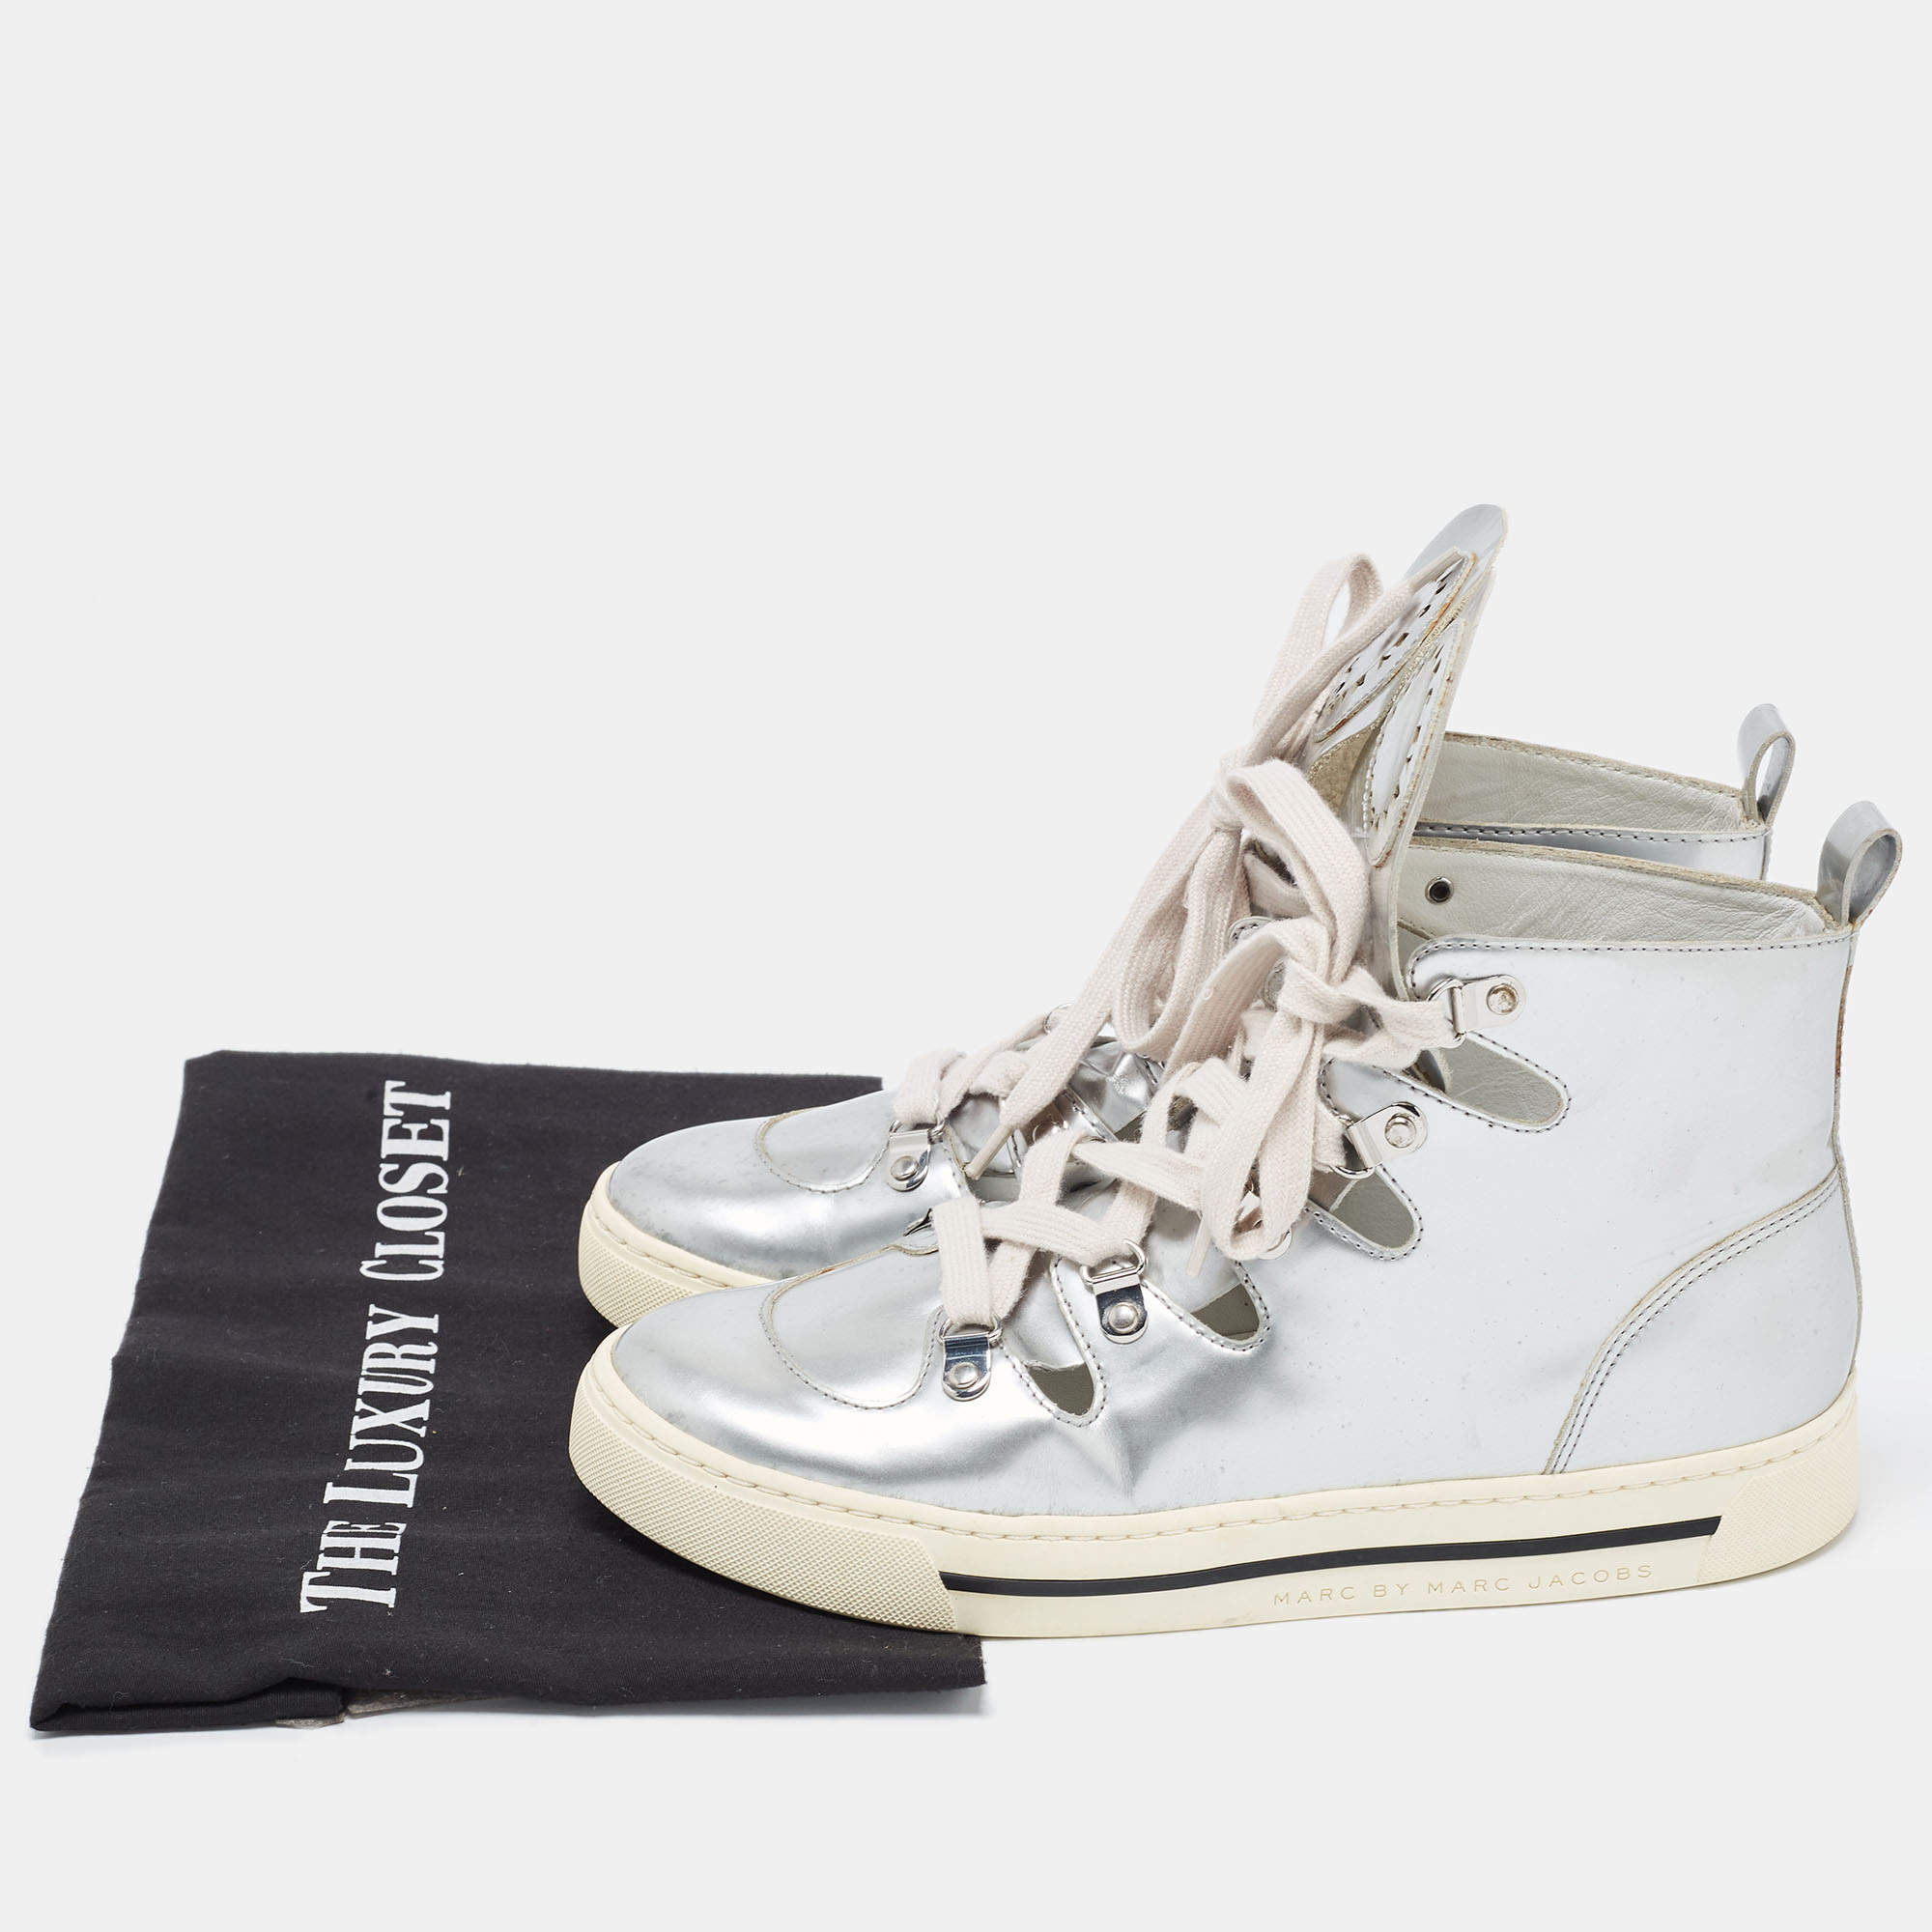 Marc by Marc Jacobs Silver Leather High Top Sneakers Size 37 Marc by Marc  Jacobs